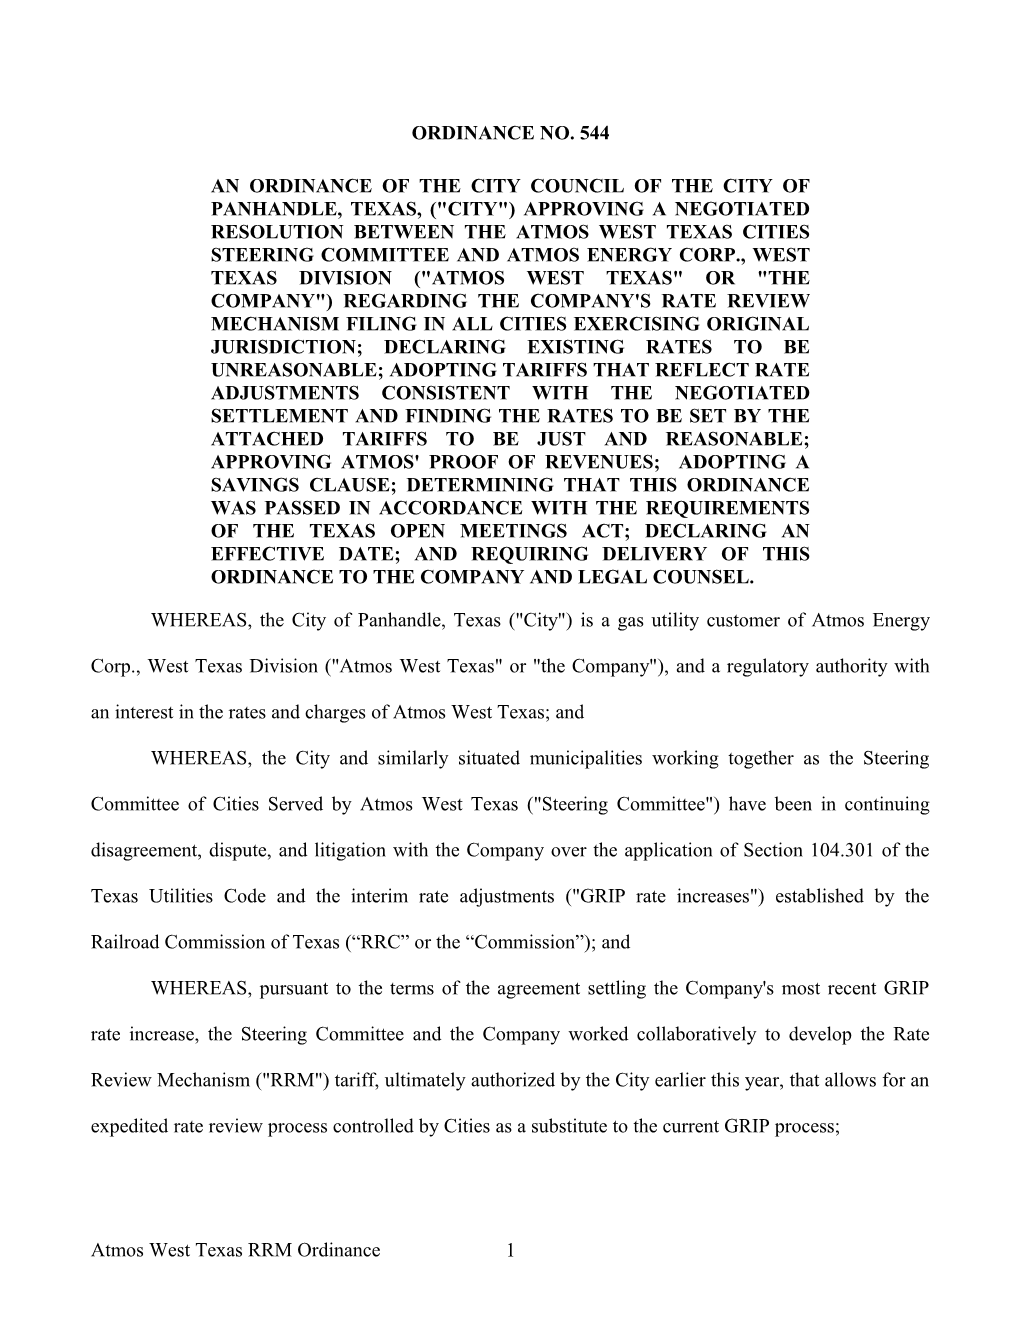 An Ordinance of the City Council of the City of PANHANDLE, Texas, ( City ) Approving A